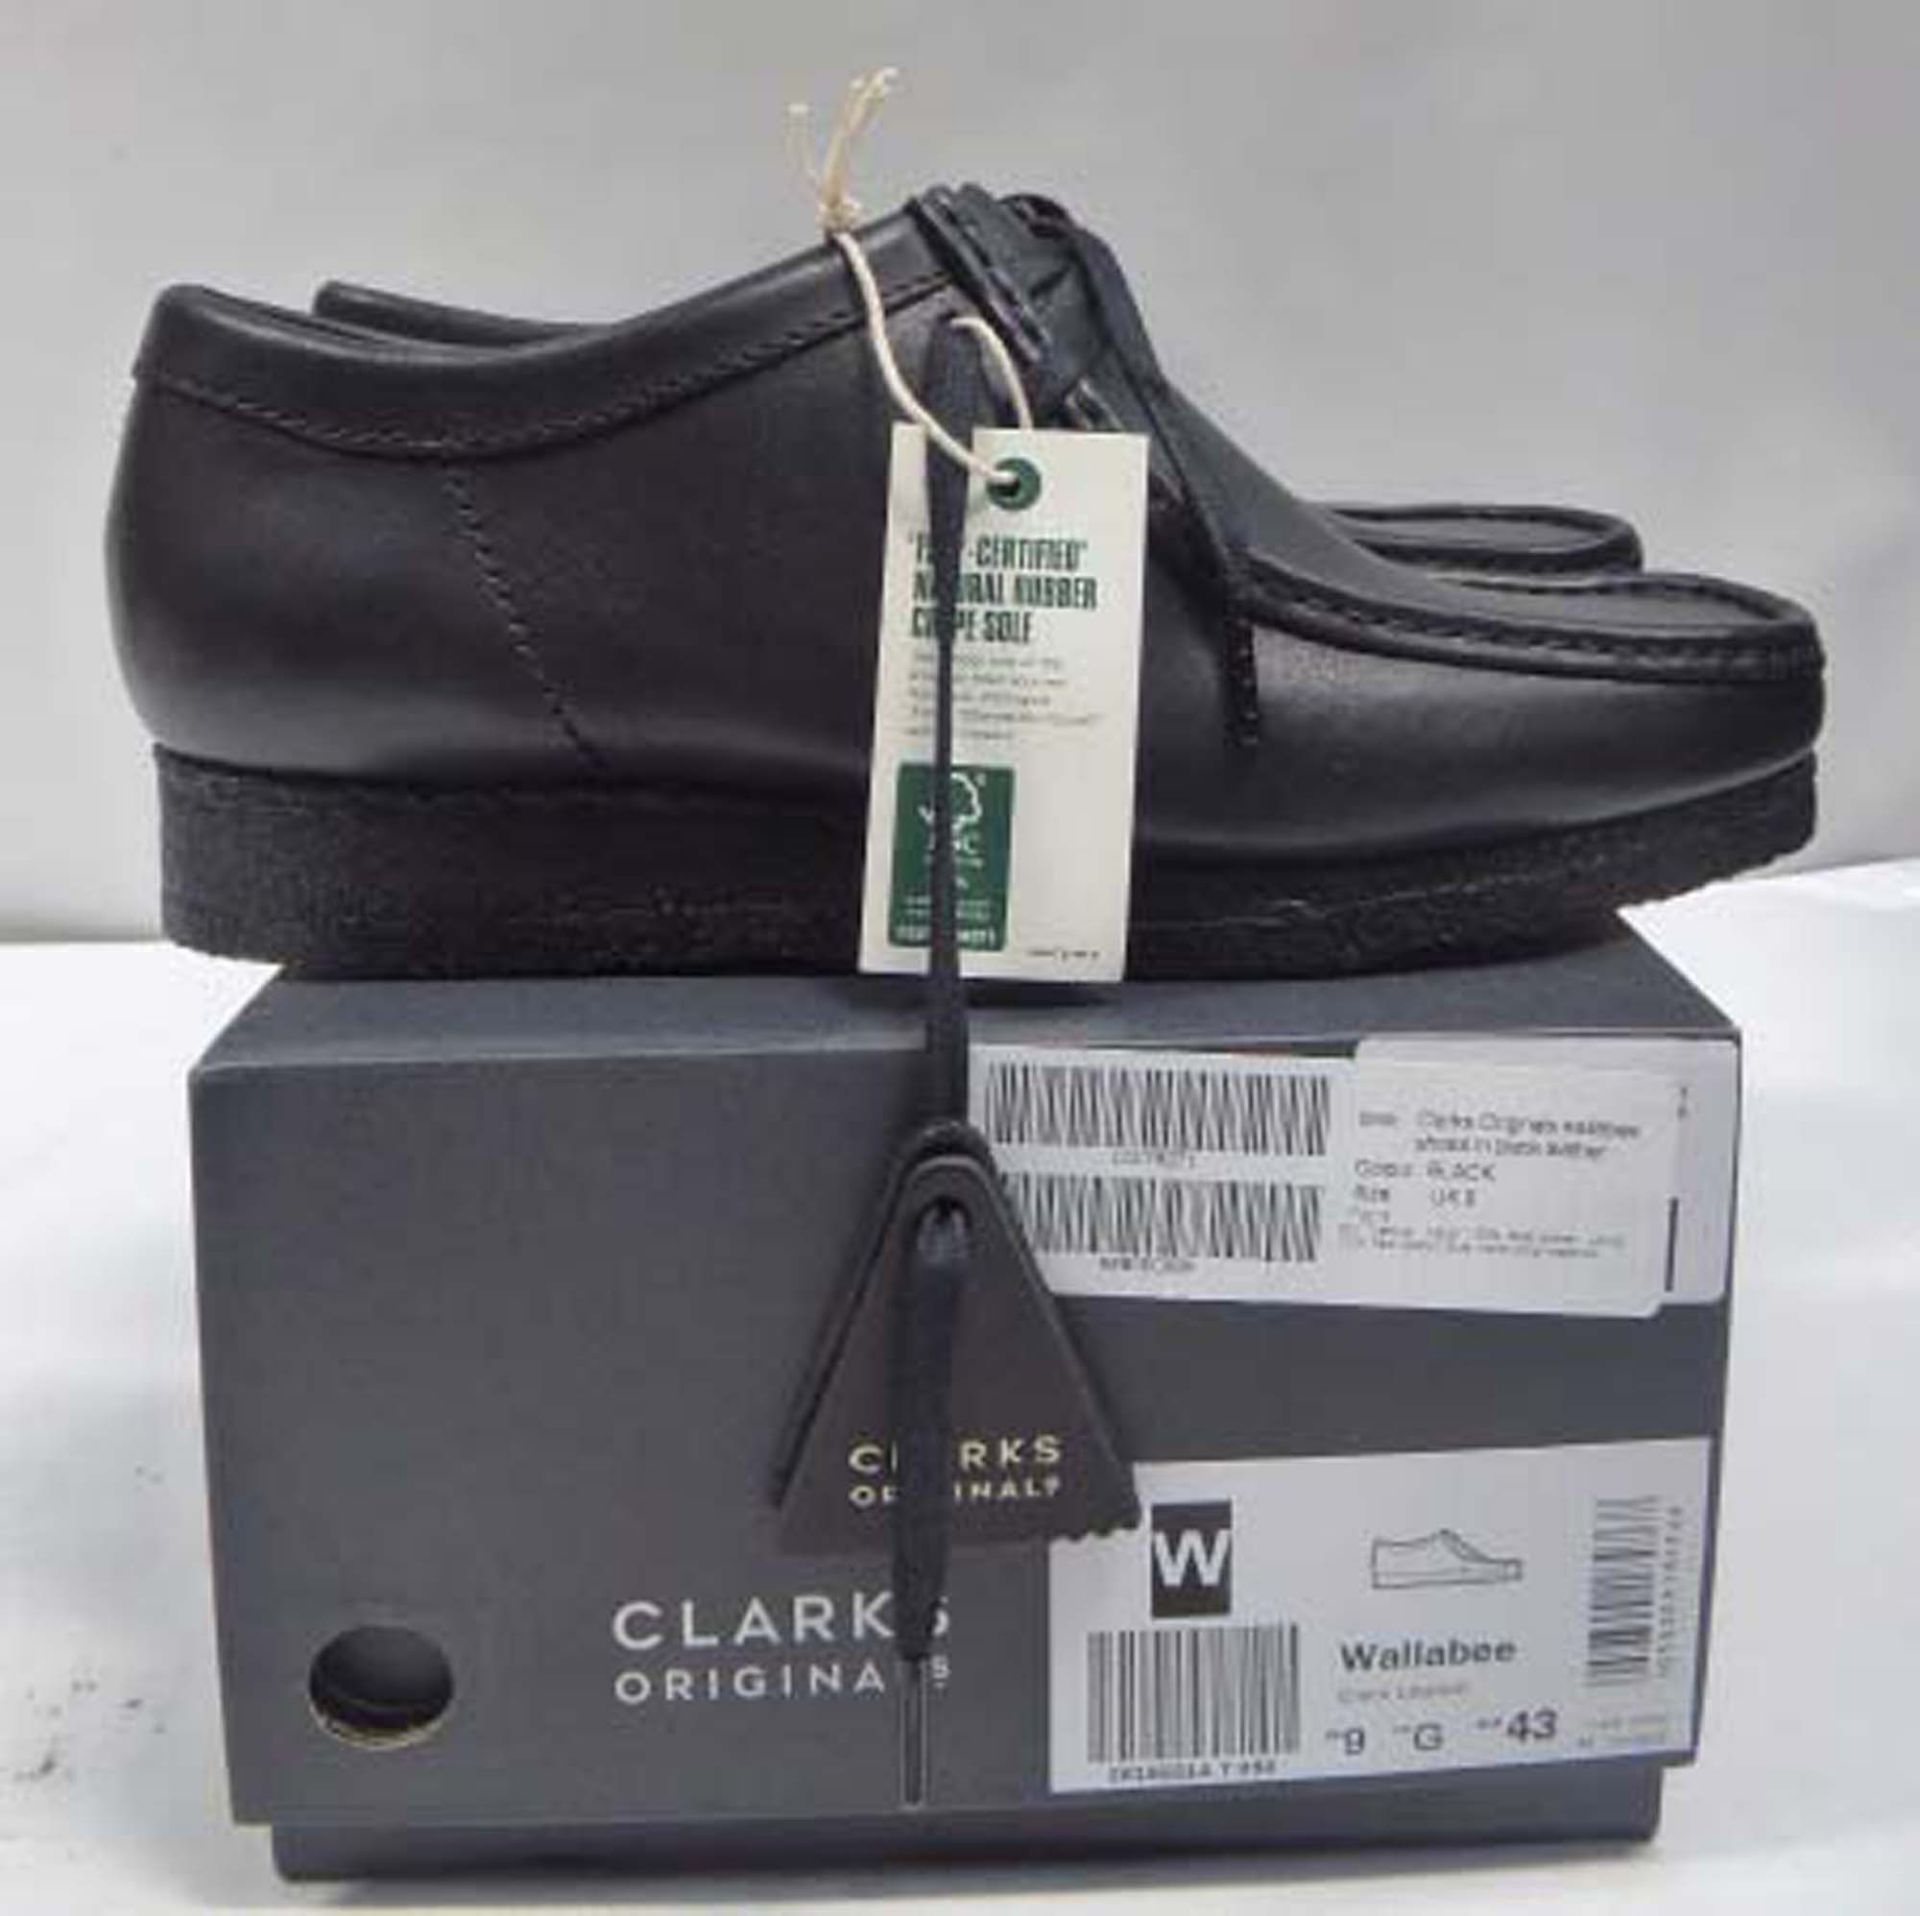 Clarks Wallabee size 9 - Image 2 of 2